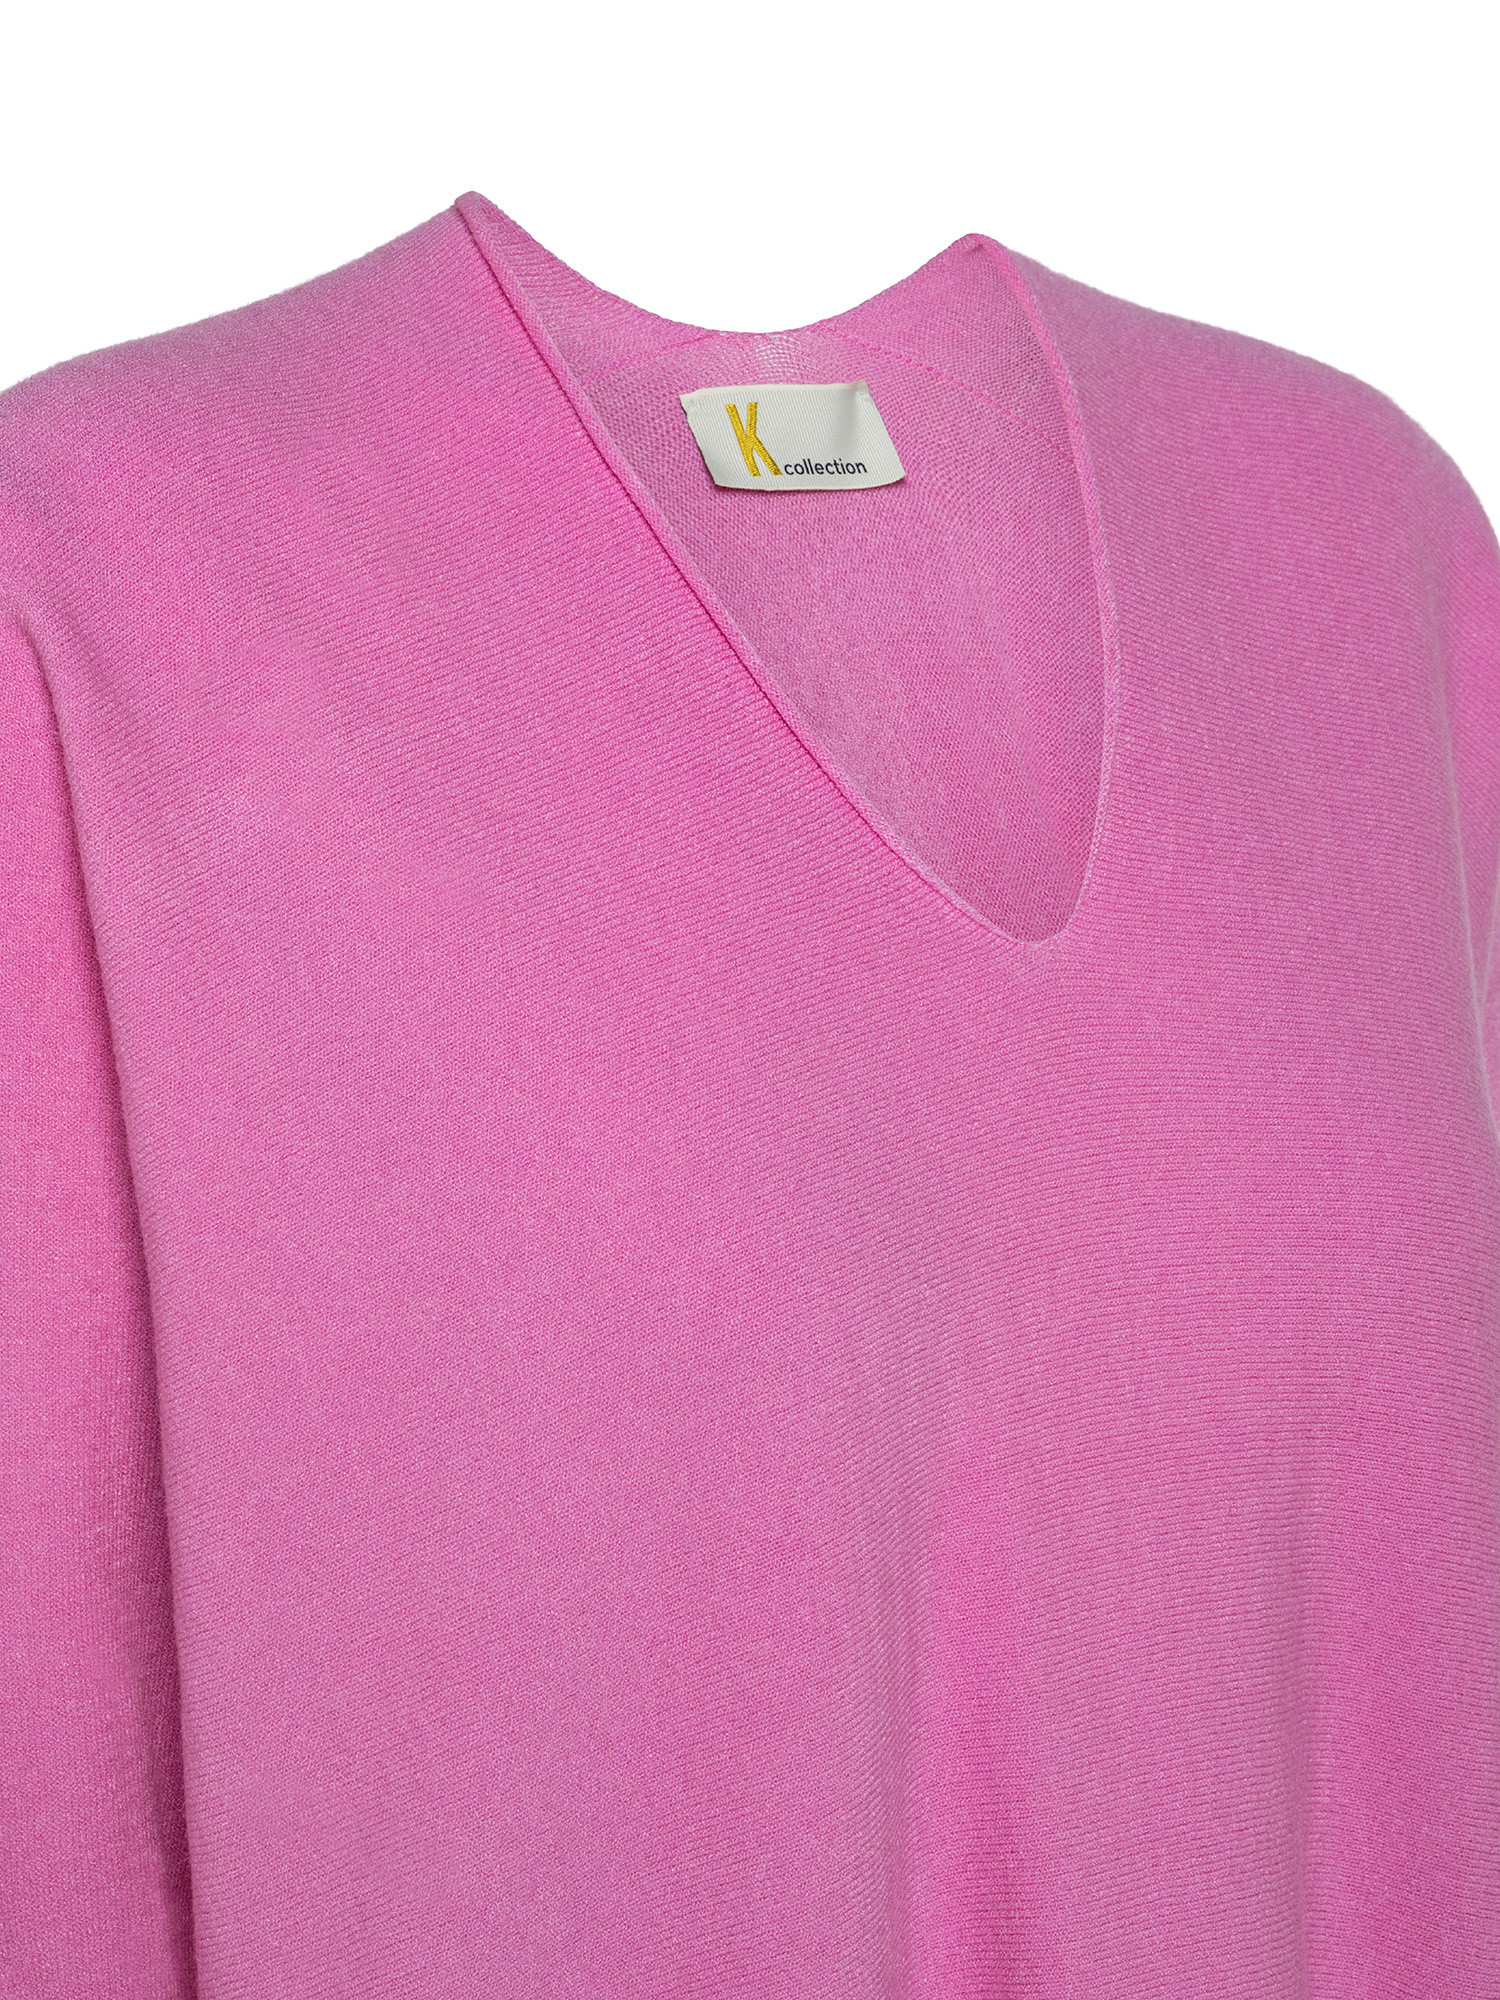 K Collection - Pullover, Rosa fuxia, large image number 2